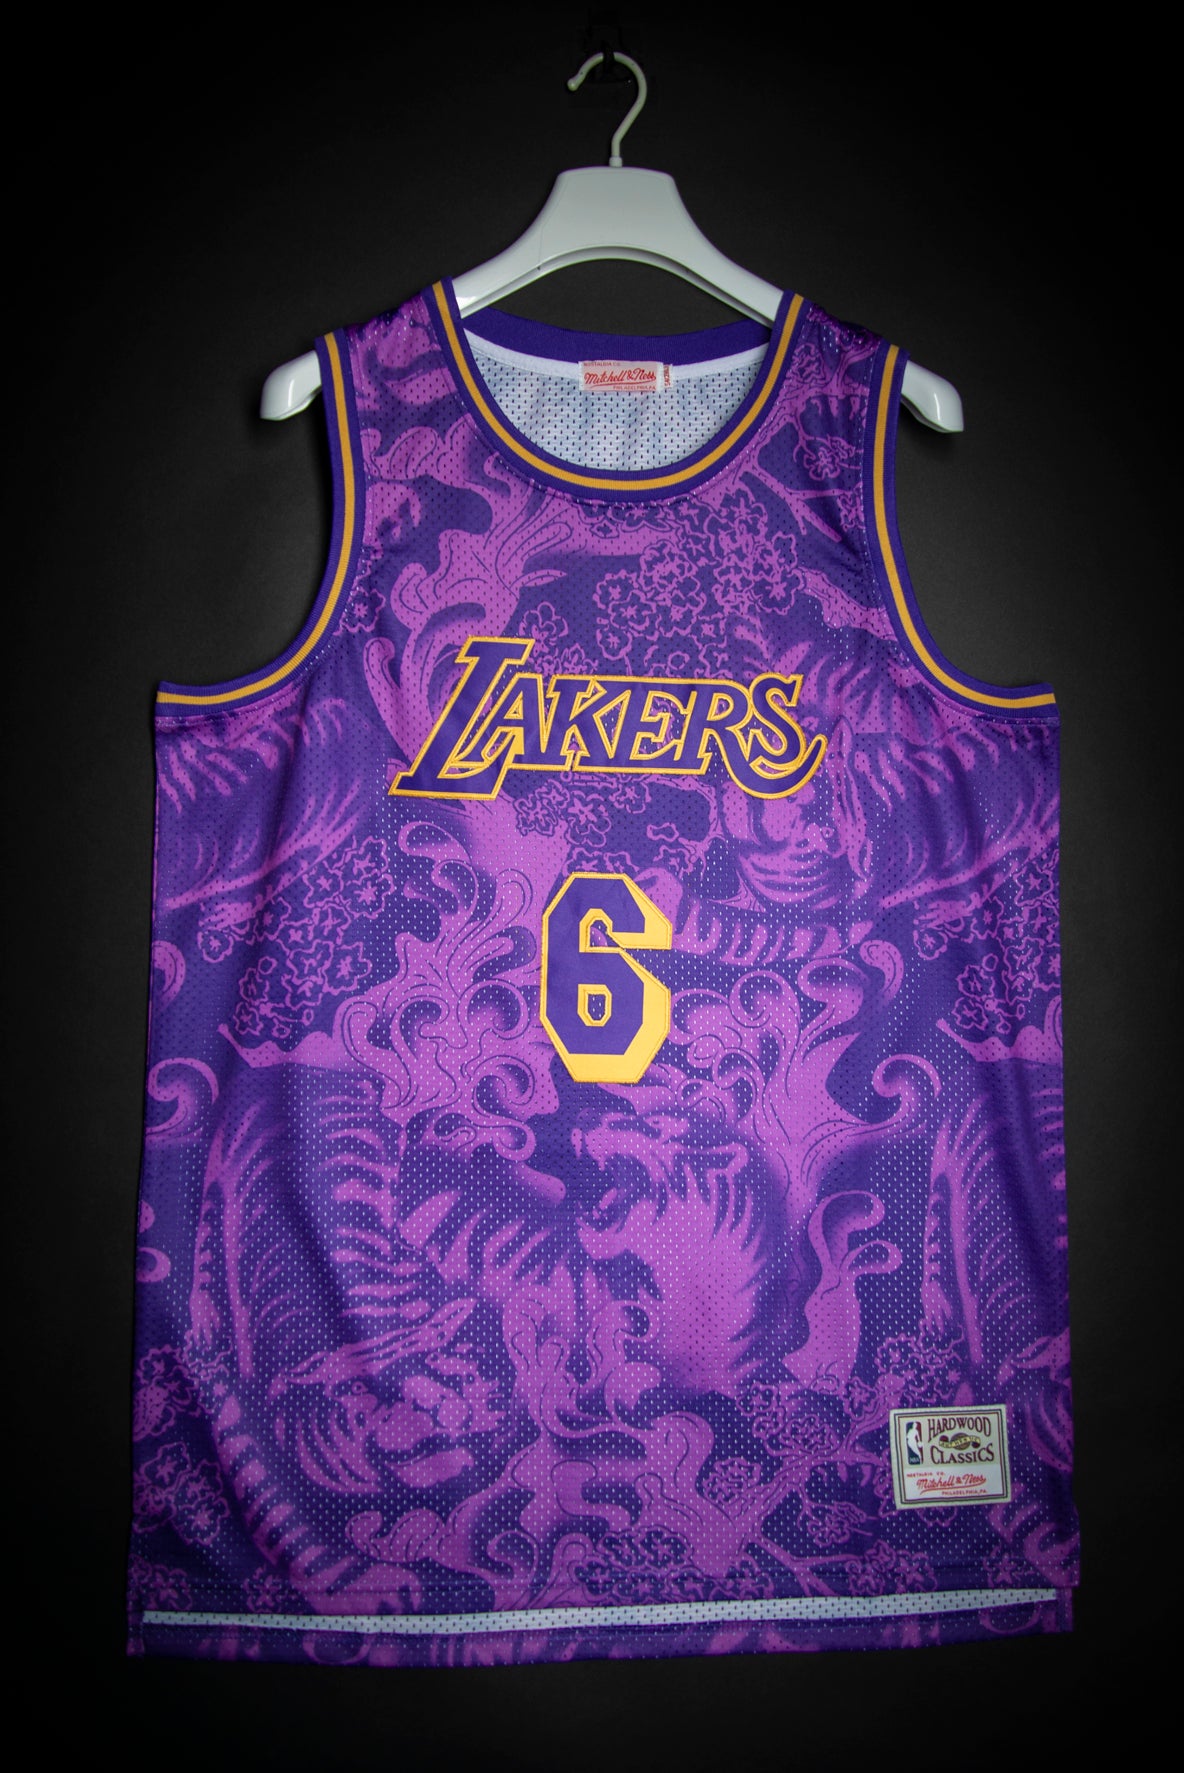 Lakers News: Lakers unveil gorgeous Classic Edition jerseys for